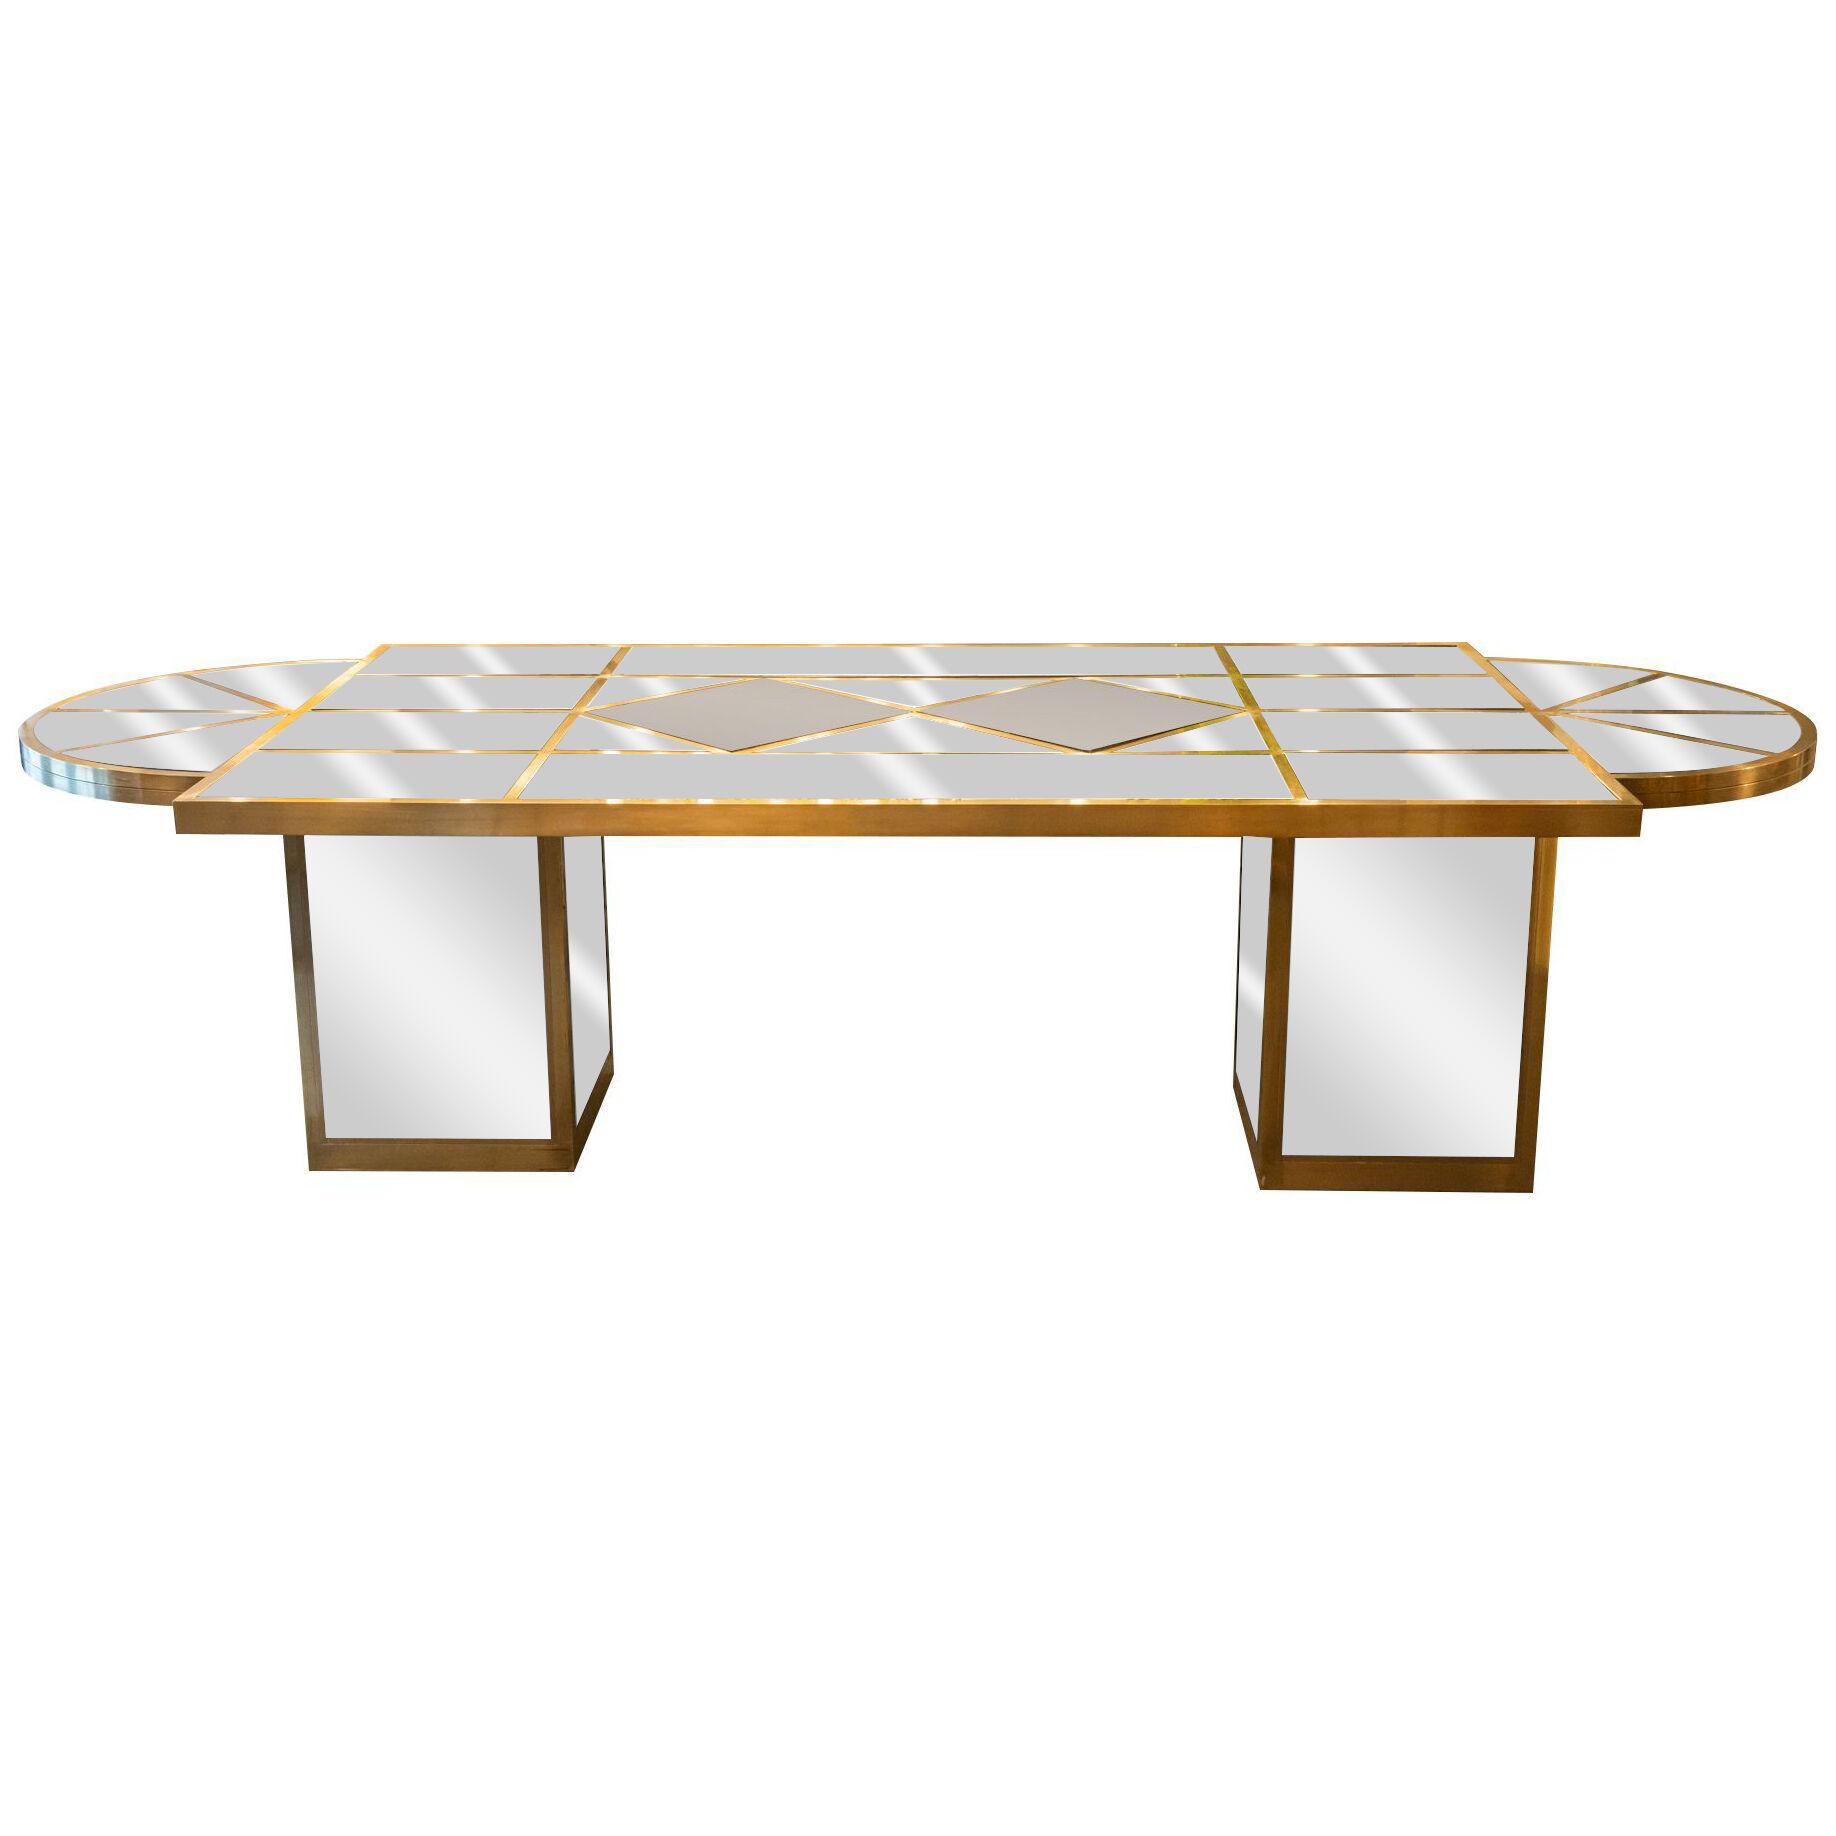 Romeo Rega, Puzzle Dining Table, Glass and brass, circa 1970, Italy